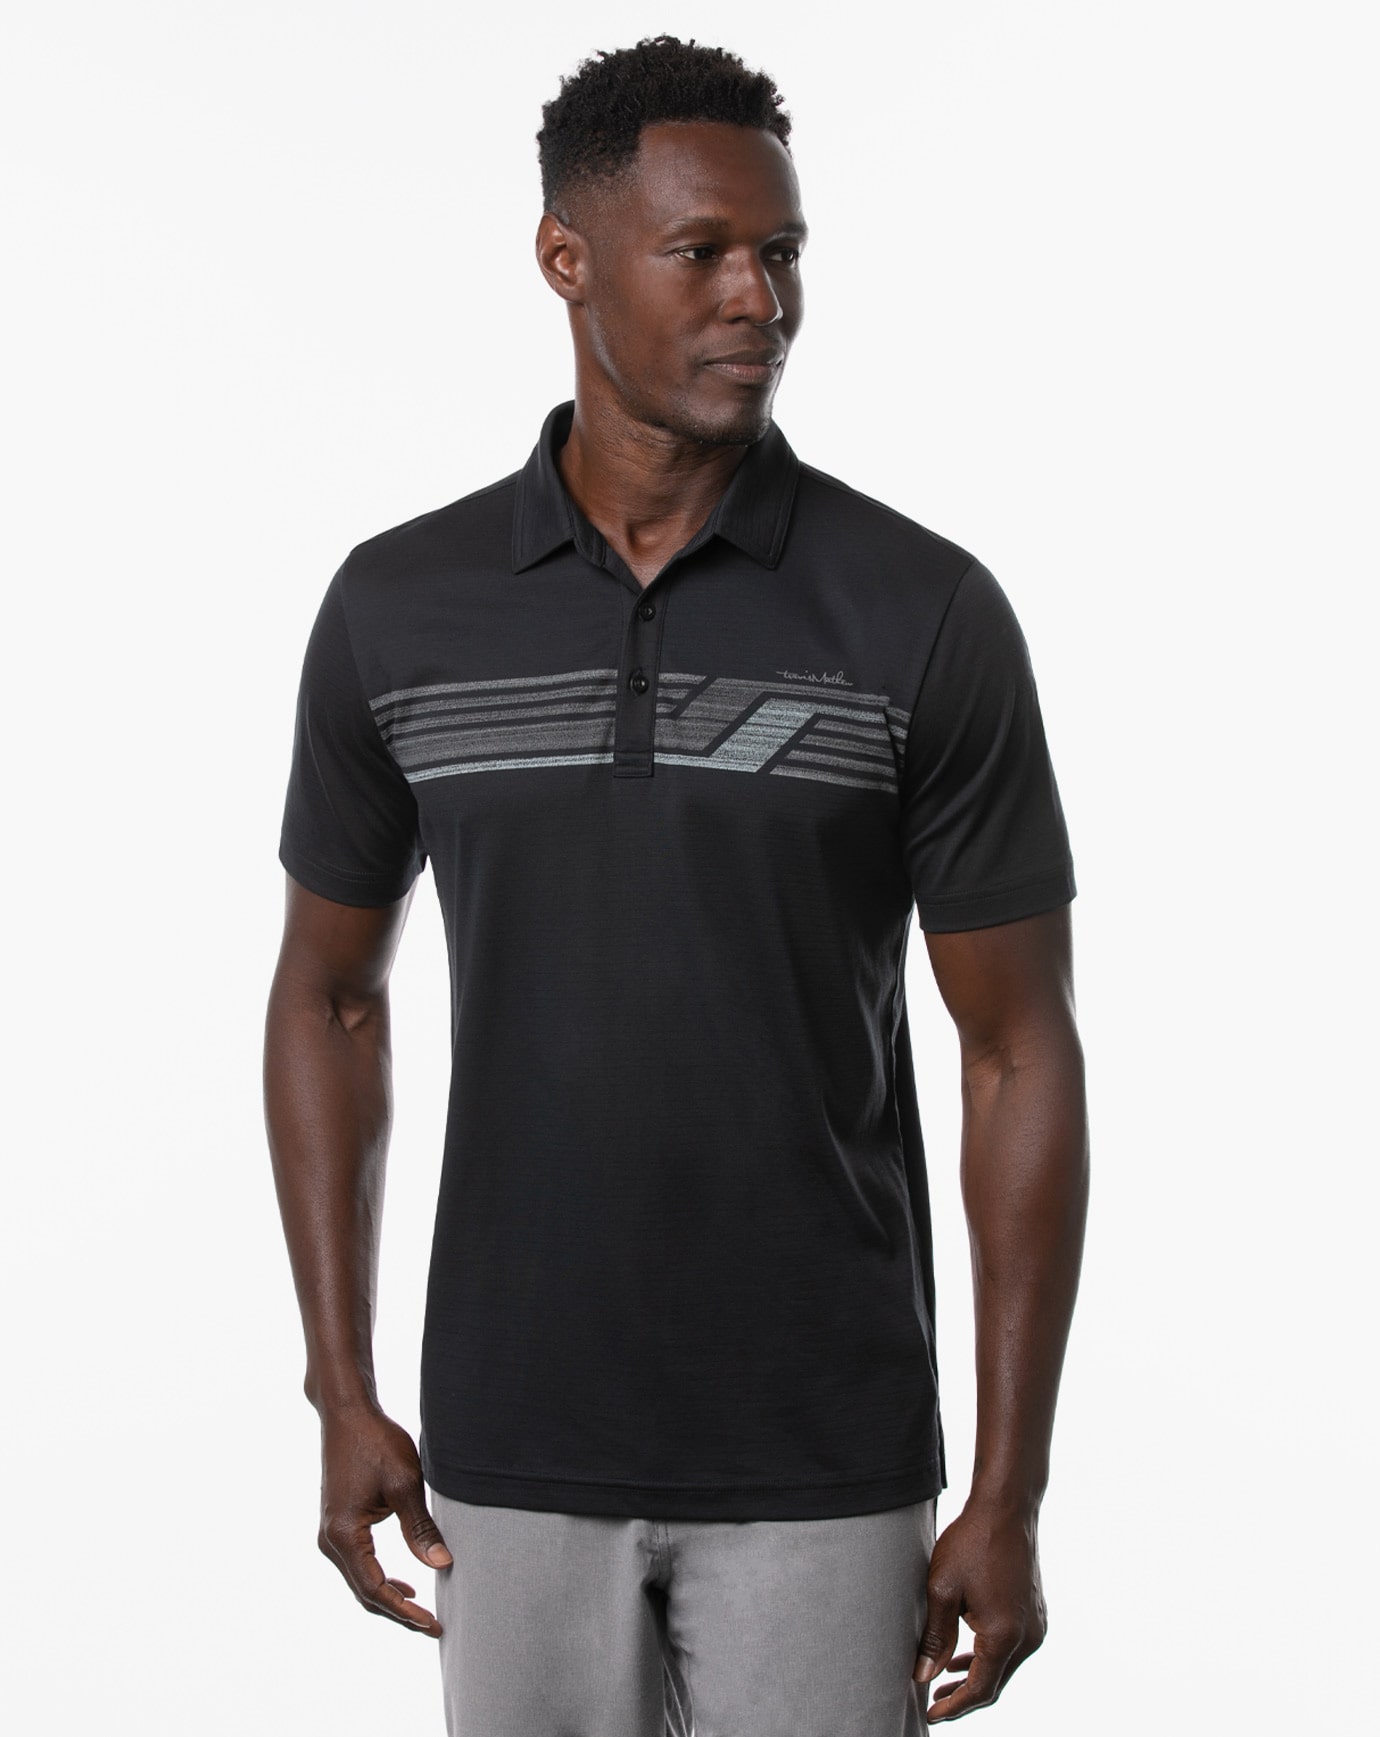 Related Product - RIVER BASIN POLO